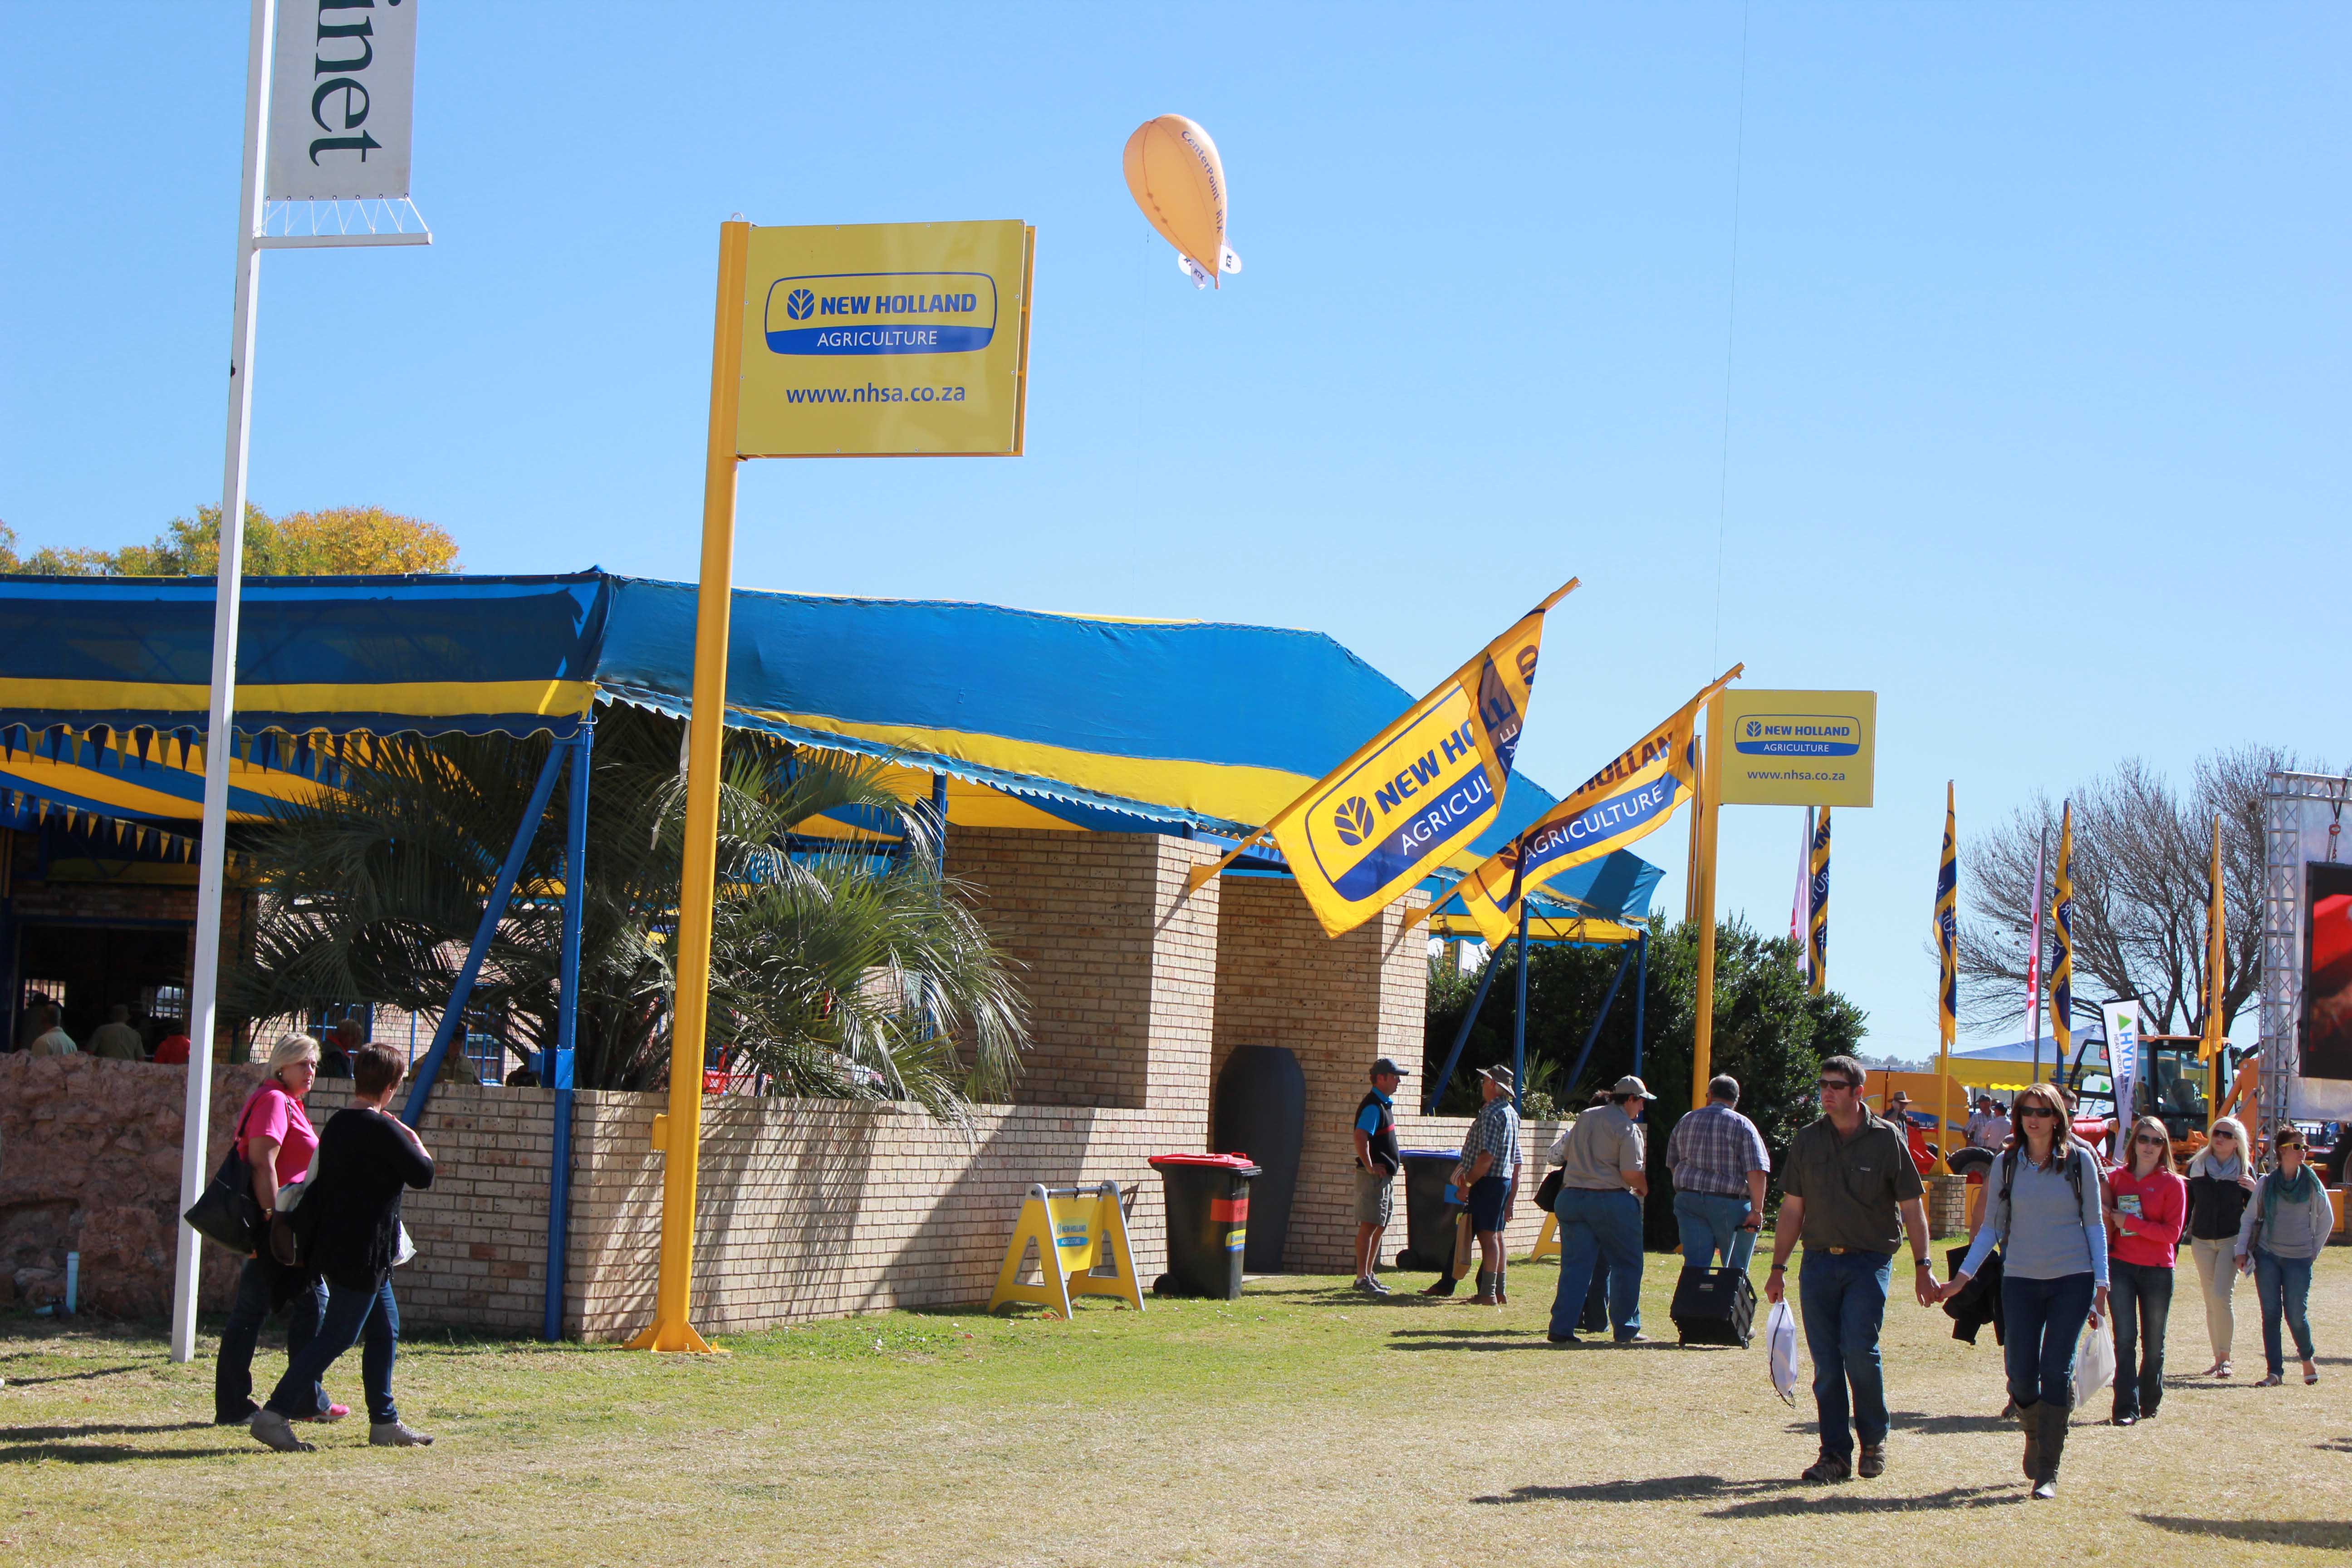 NEW HOLLAND SHOWS ADVANCED TECHNOLOGIES AND PRODUCTS IN HIGH-IMPACT STAND AT NAMPO SHOW